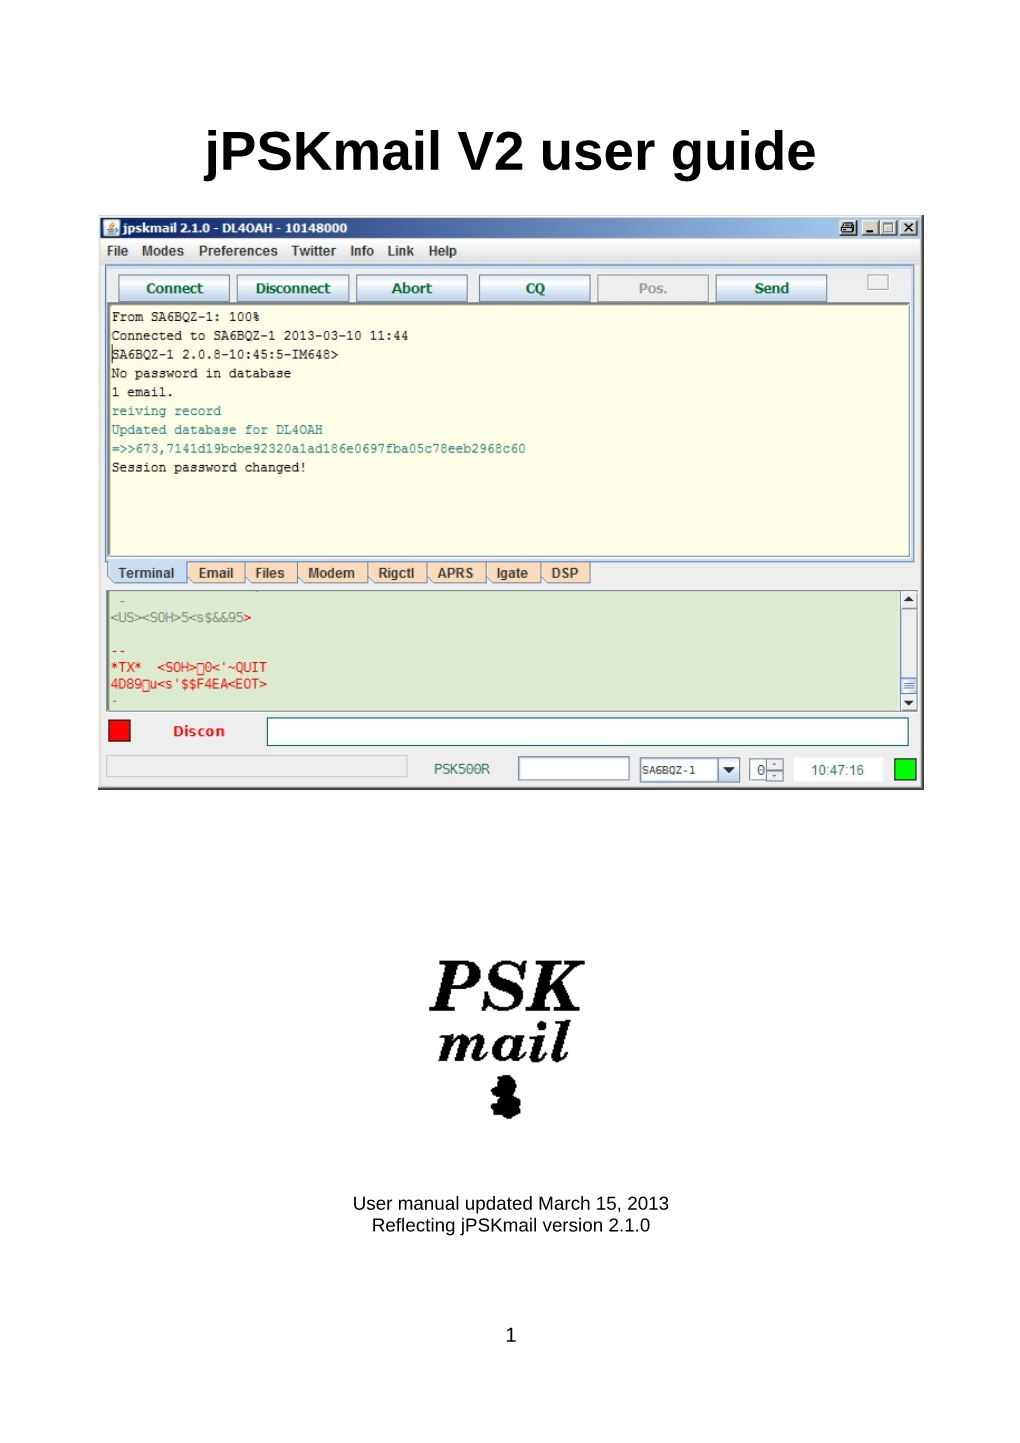 Manual Updated March 15, 2013 Reflecting Jpskmail Version 2.1.0